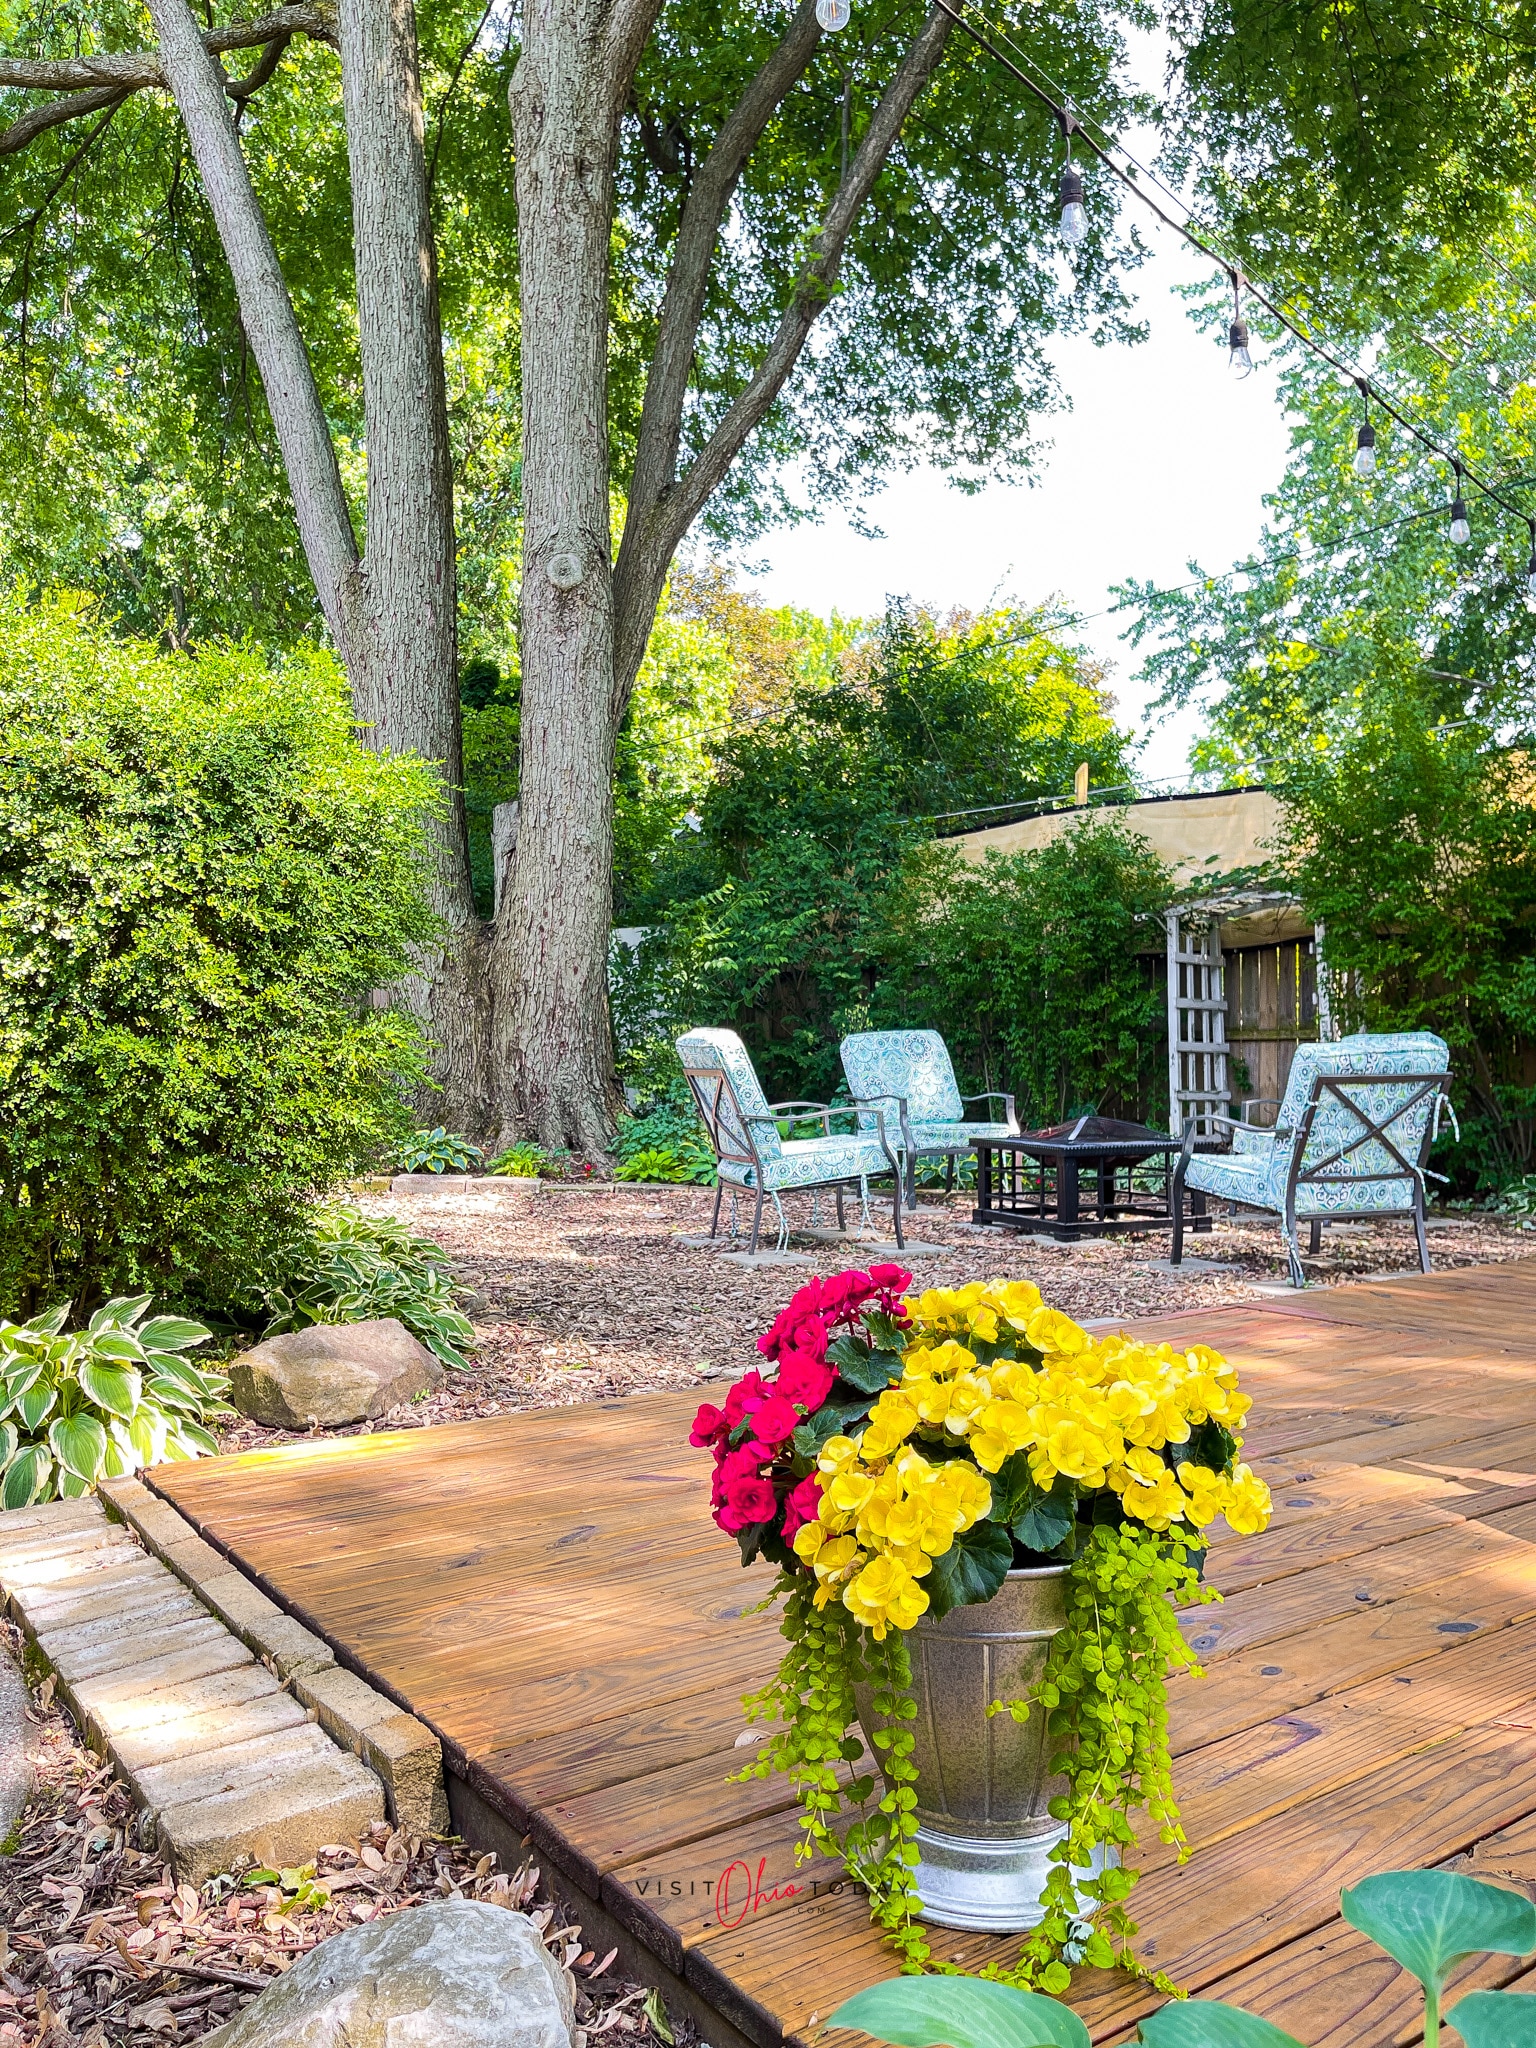 backyard oasis, wooden deck with colorful potted flowers and mulched fire pit area with four chairs